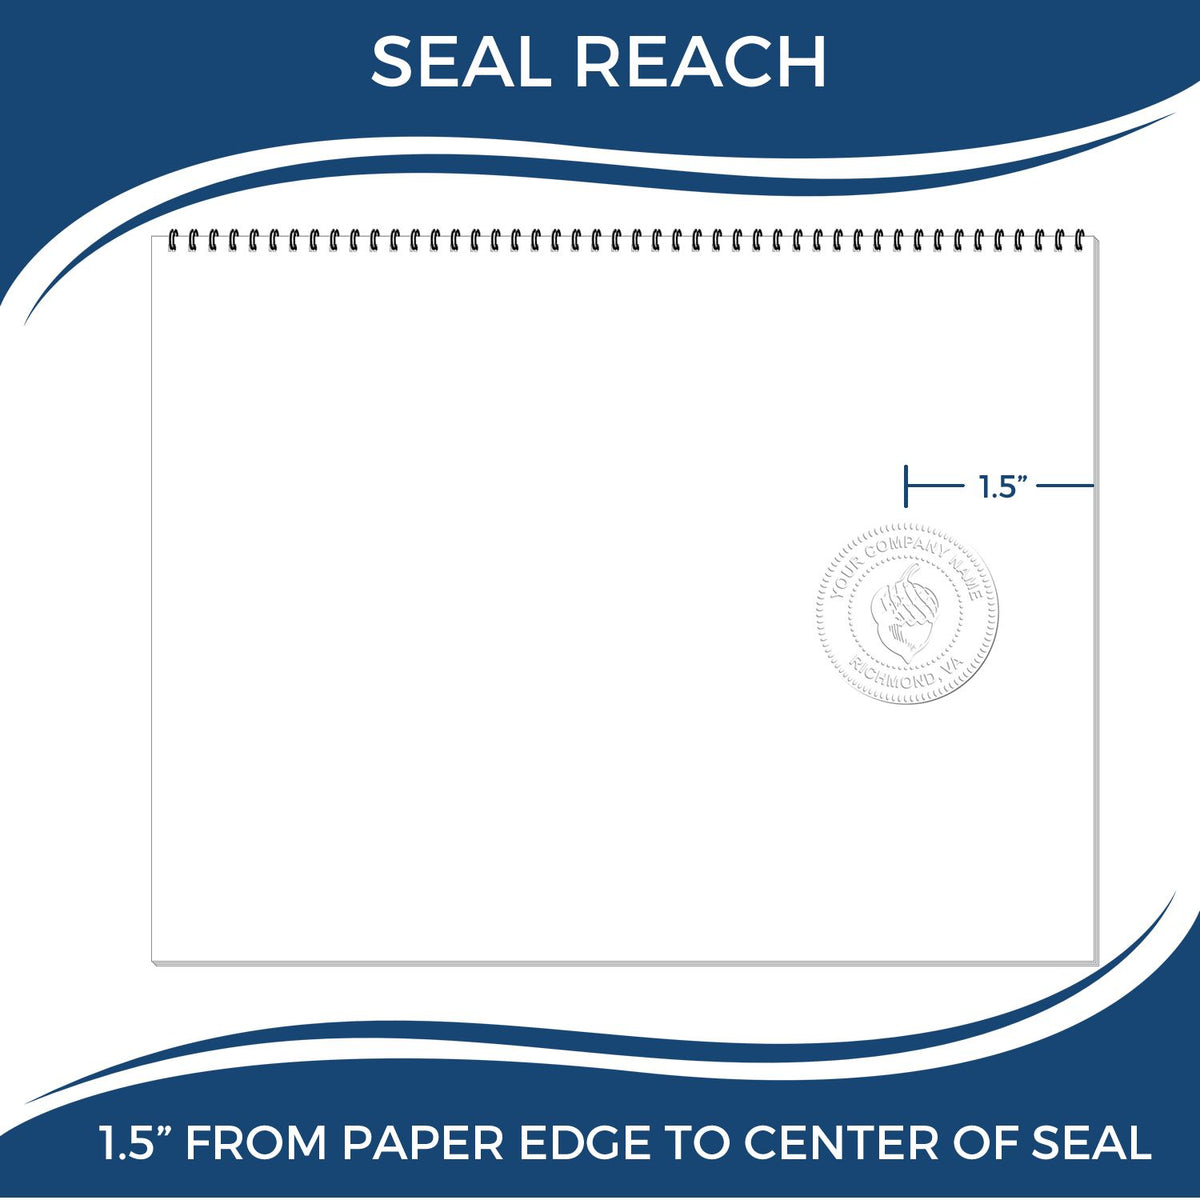 An infographic showing the seal reach which is represented by a ruler and a miniature seal image of the State of Nebraska Architectural Seal Embosser